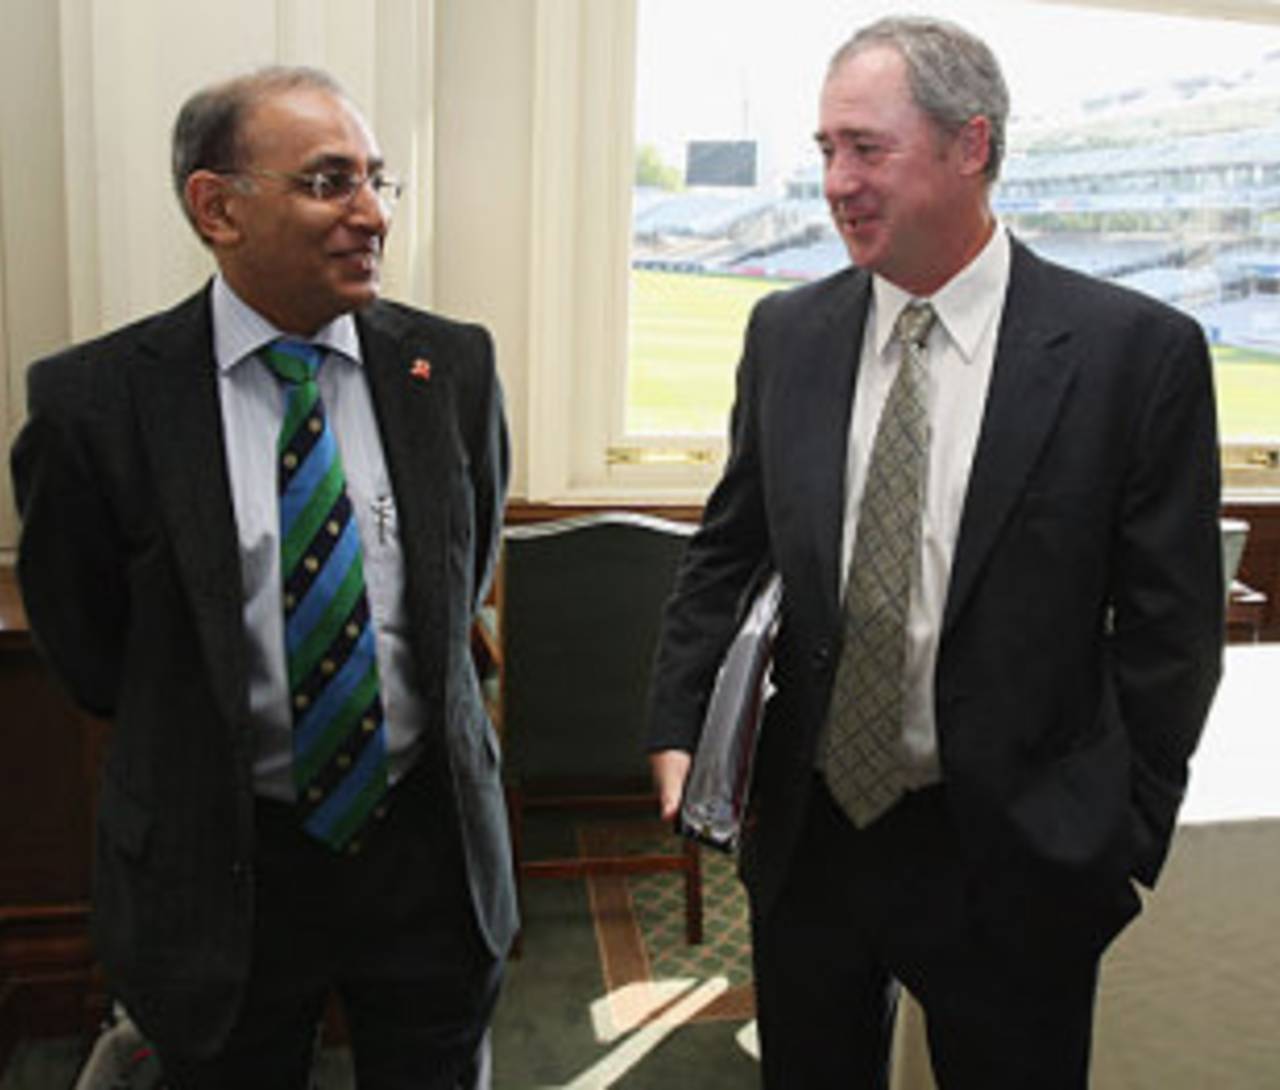 Tim May (right) would not be surprised if the ICC board rejected the proposals, but he warned that in such a scenario "natural forces will take effect."&nbsp;&nbsp;&bull;&nbsp;&nbsp;Getty Images